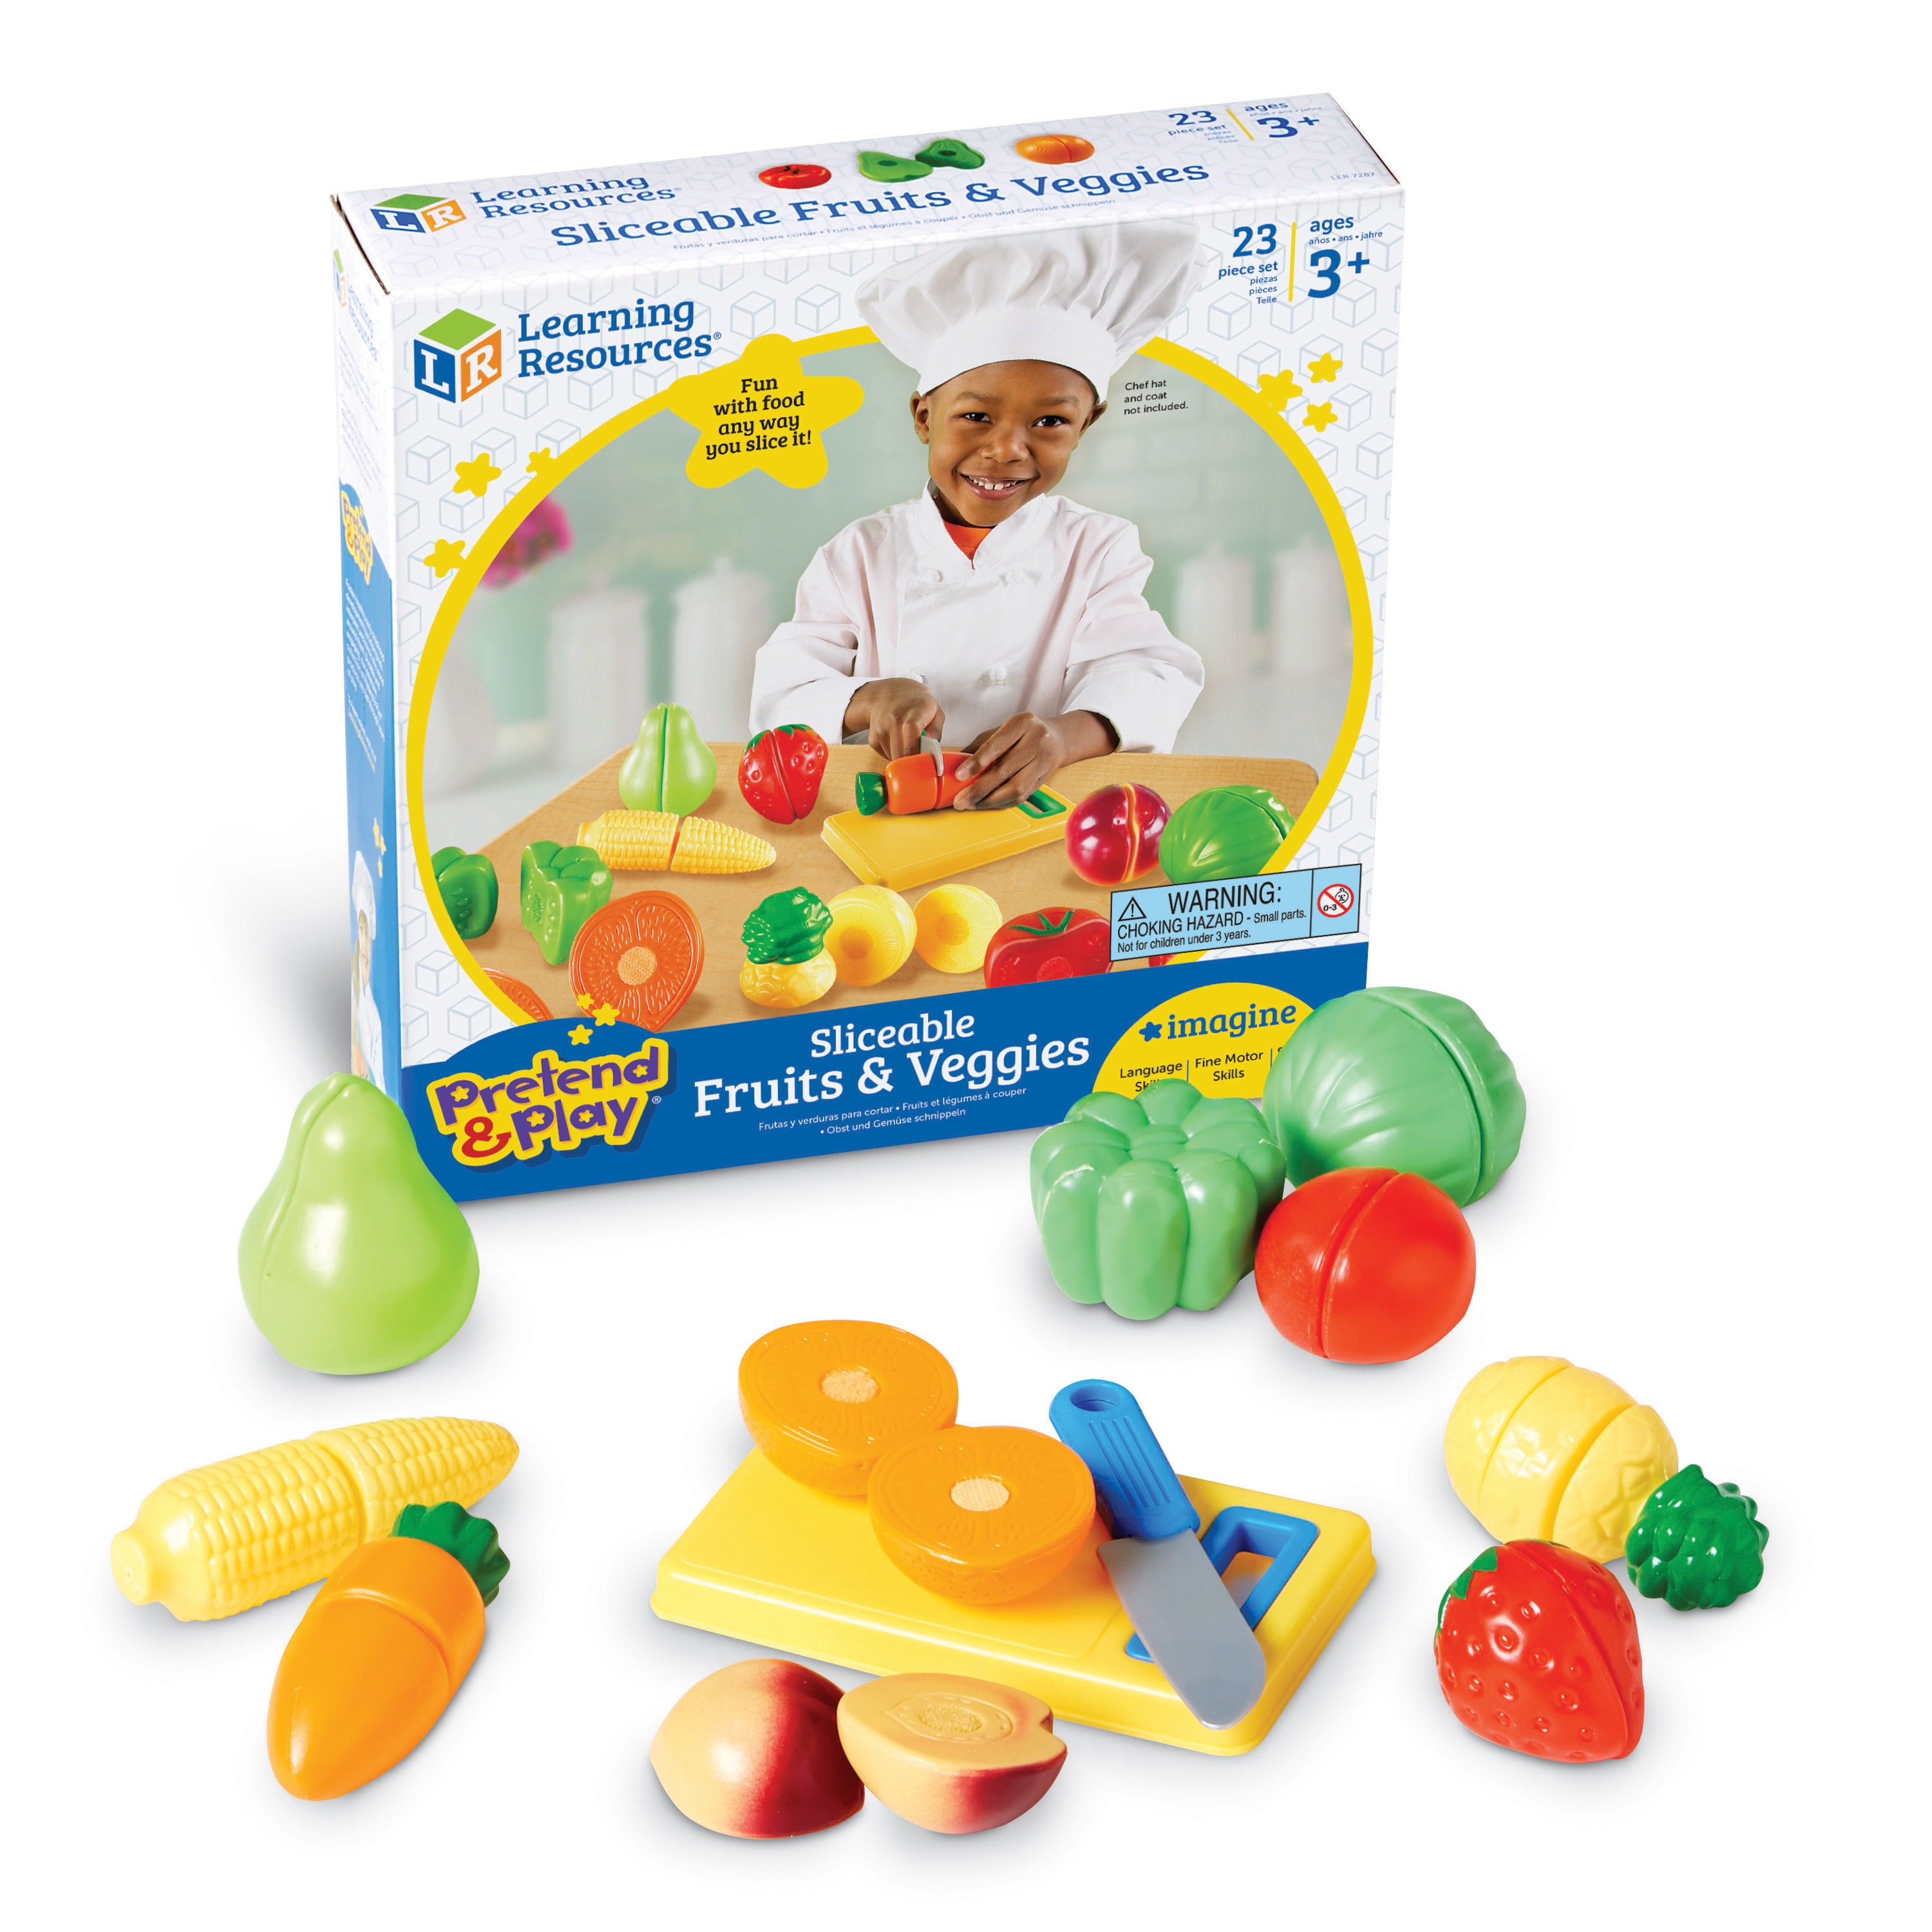 Wooden Kids Cut up Pretend Play Kitchen Toy Food Cutting Fruit Vegetable Board for sale online 